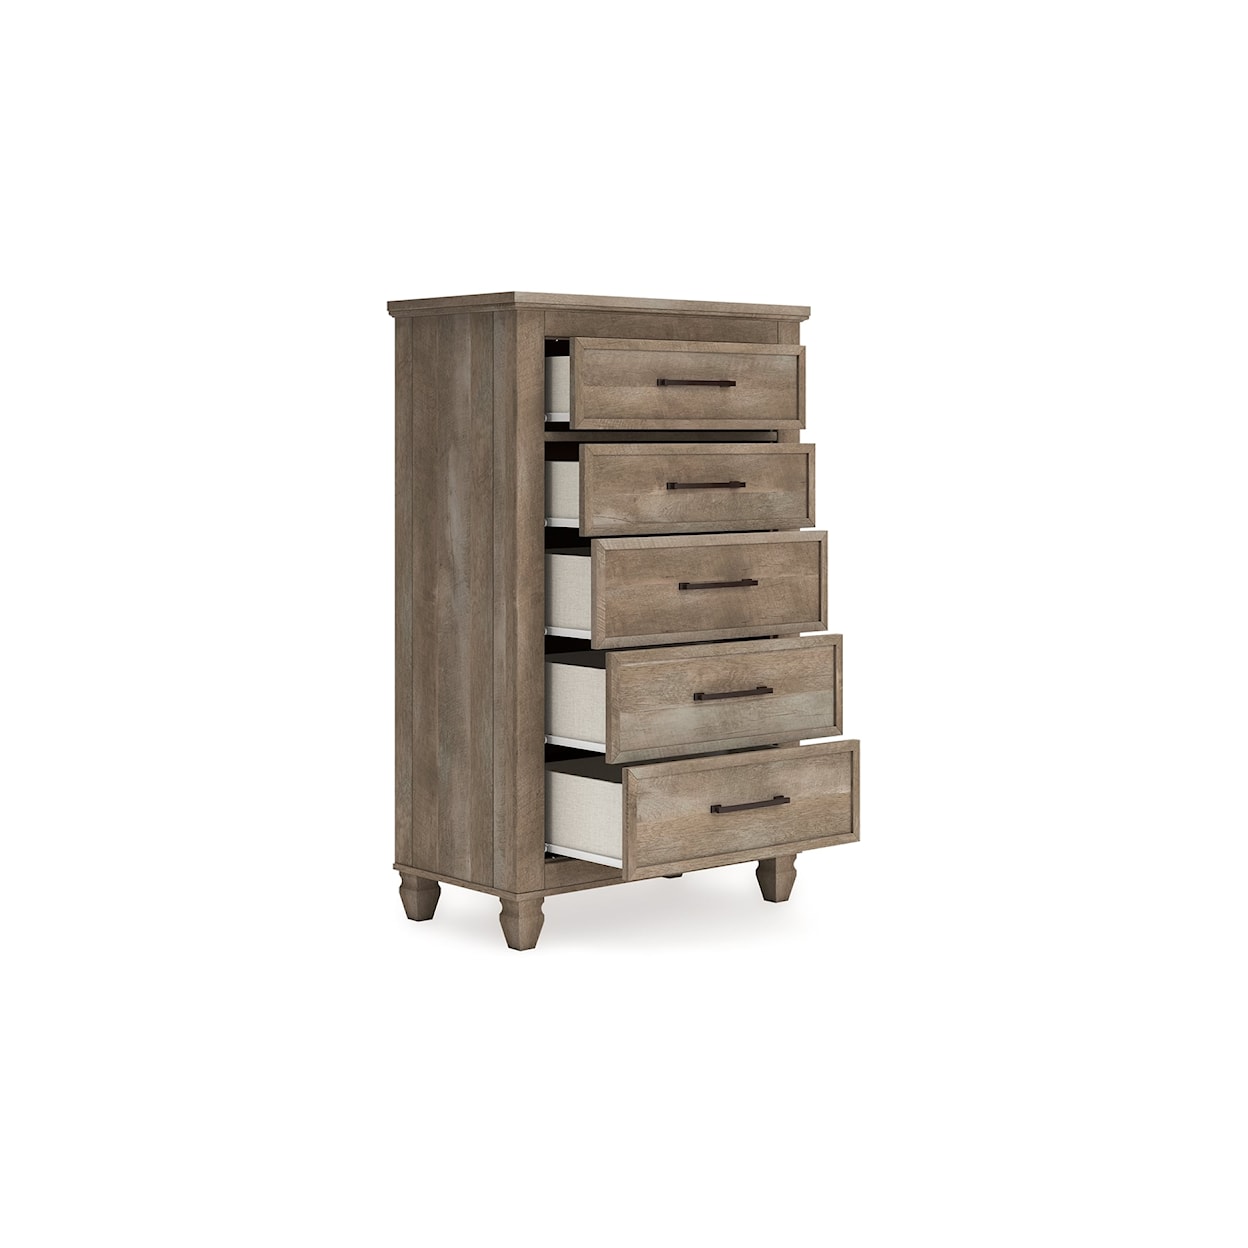 Signature Yarbeck Bedroom Chest